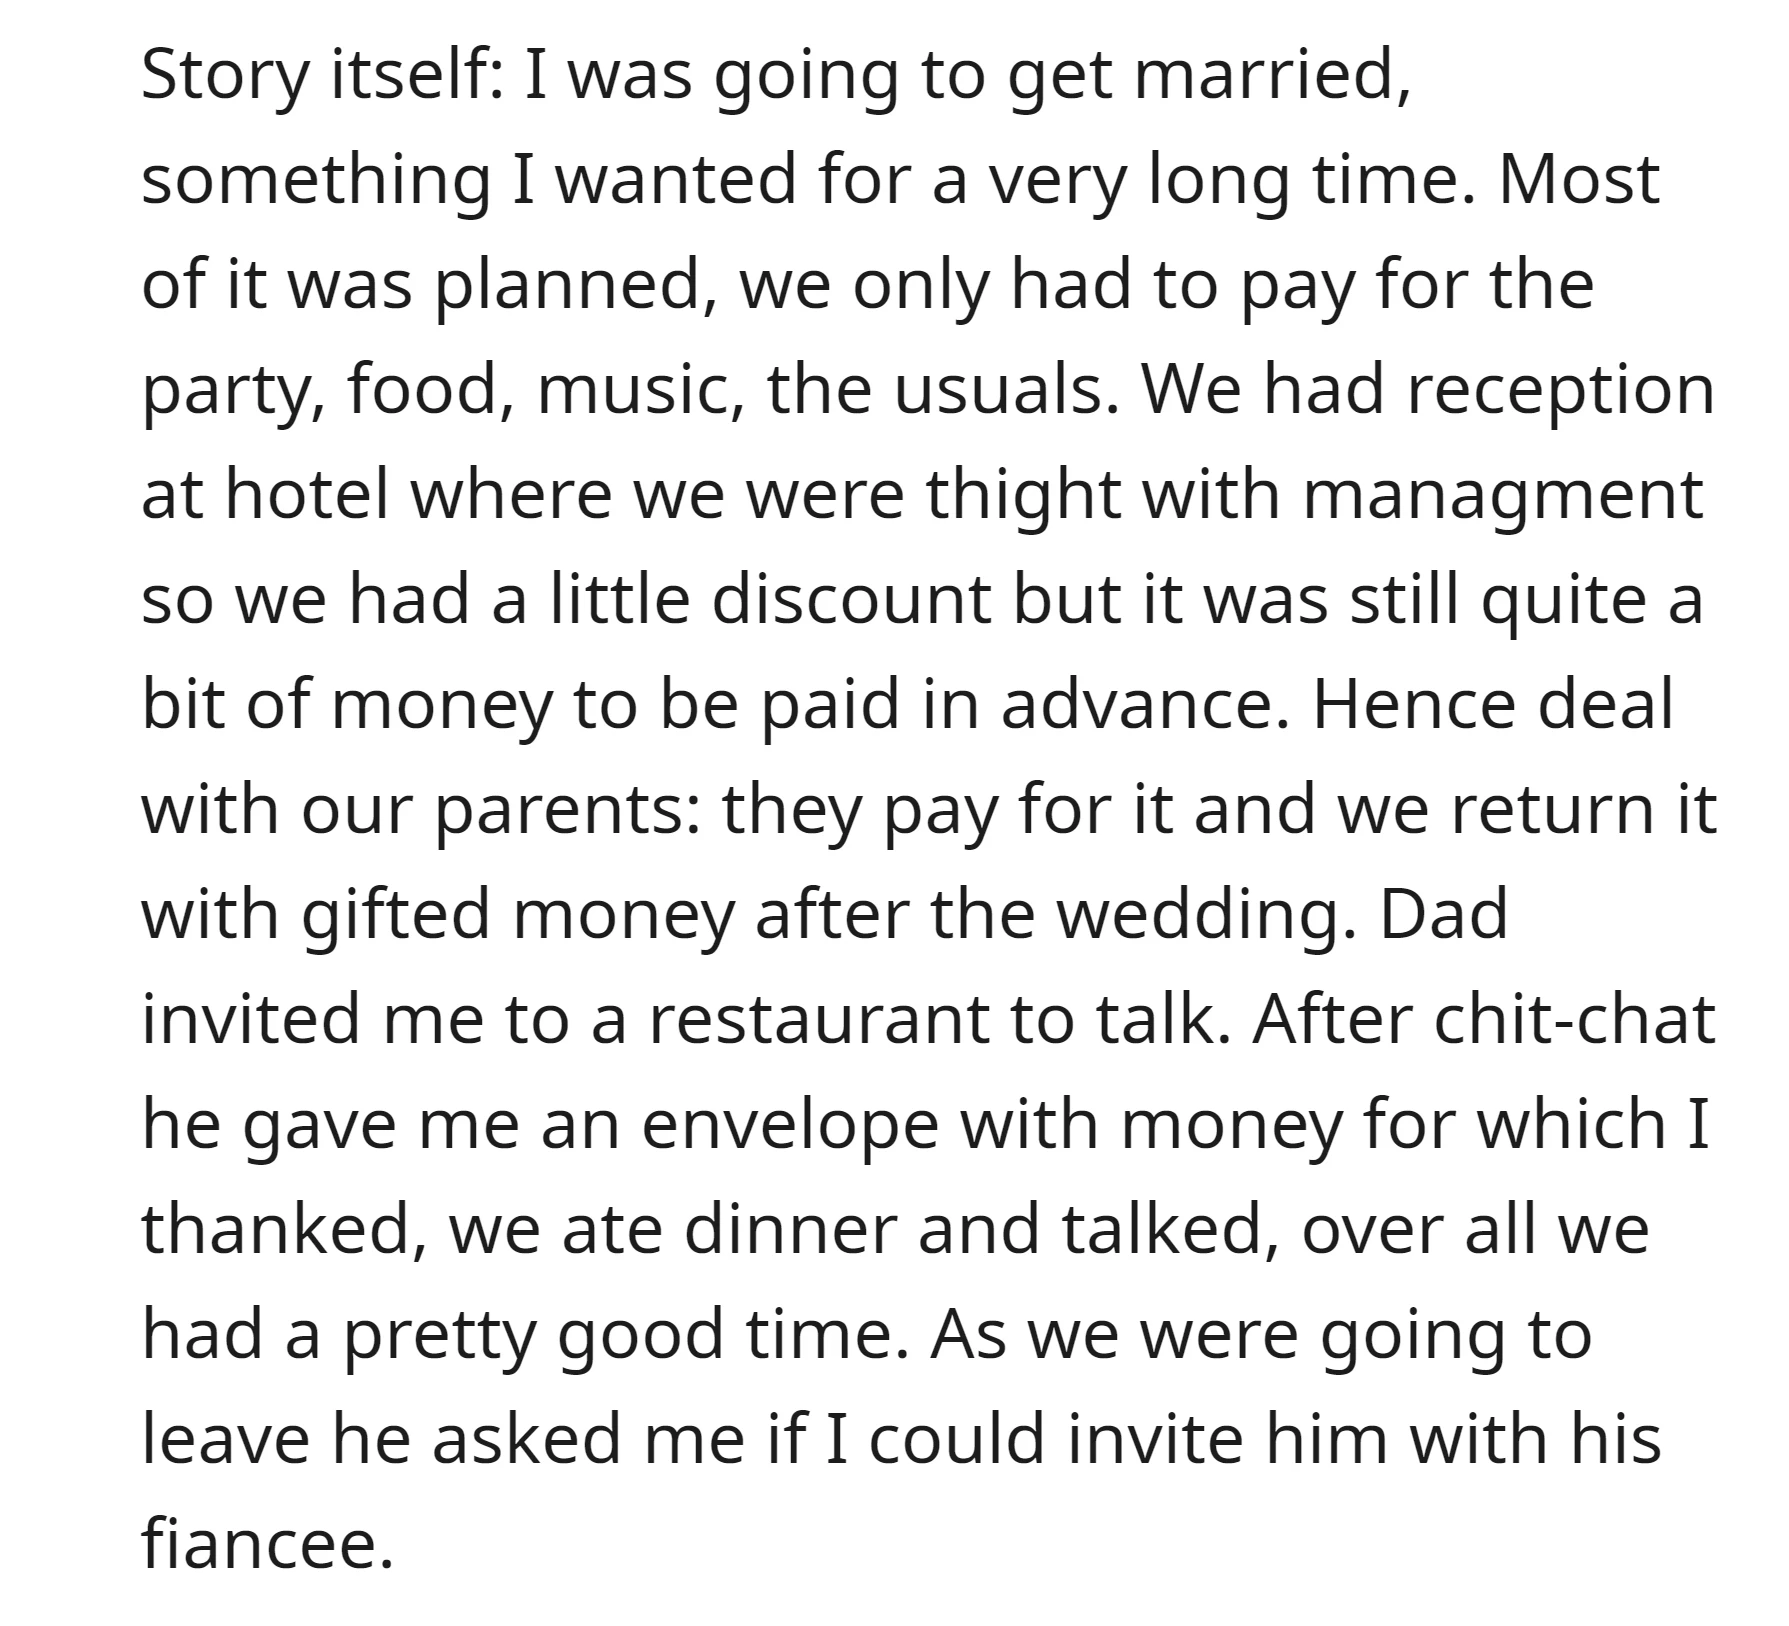 OP's dad gave her money for the wedding expenses and asked her to invite his girlfriend to attend the wedding